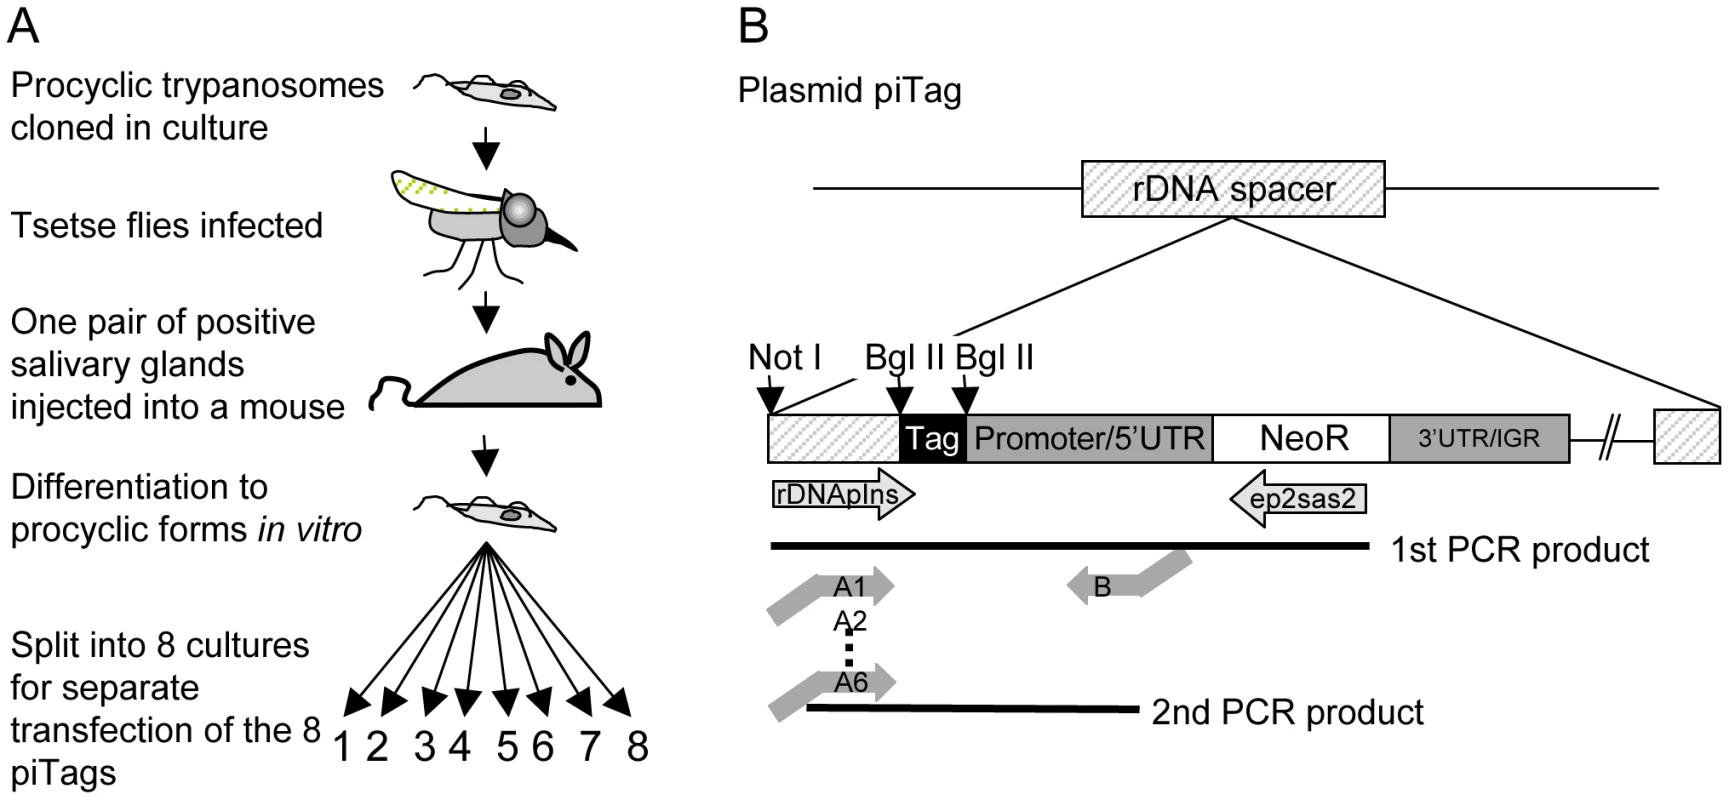 Cloning procedure and generation of tagged trypanosomes.